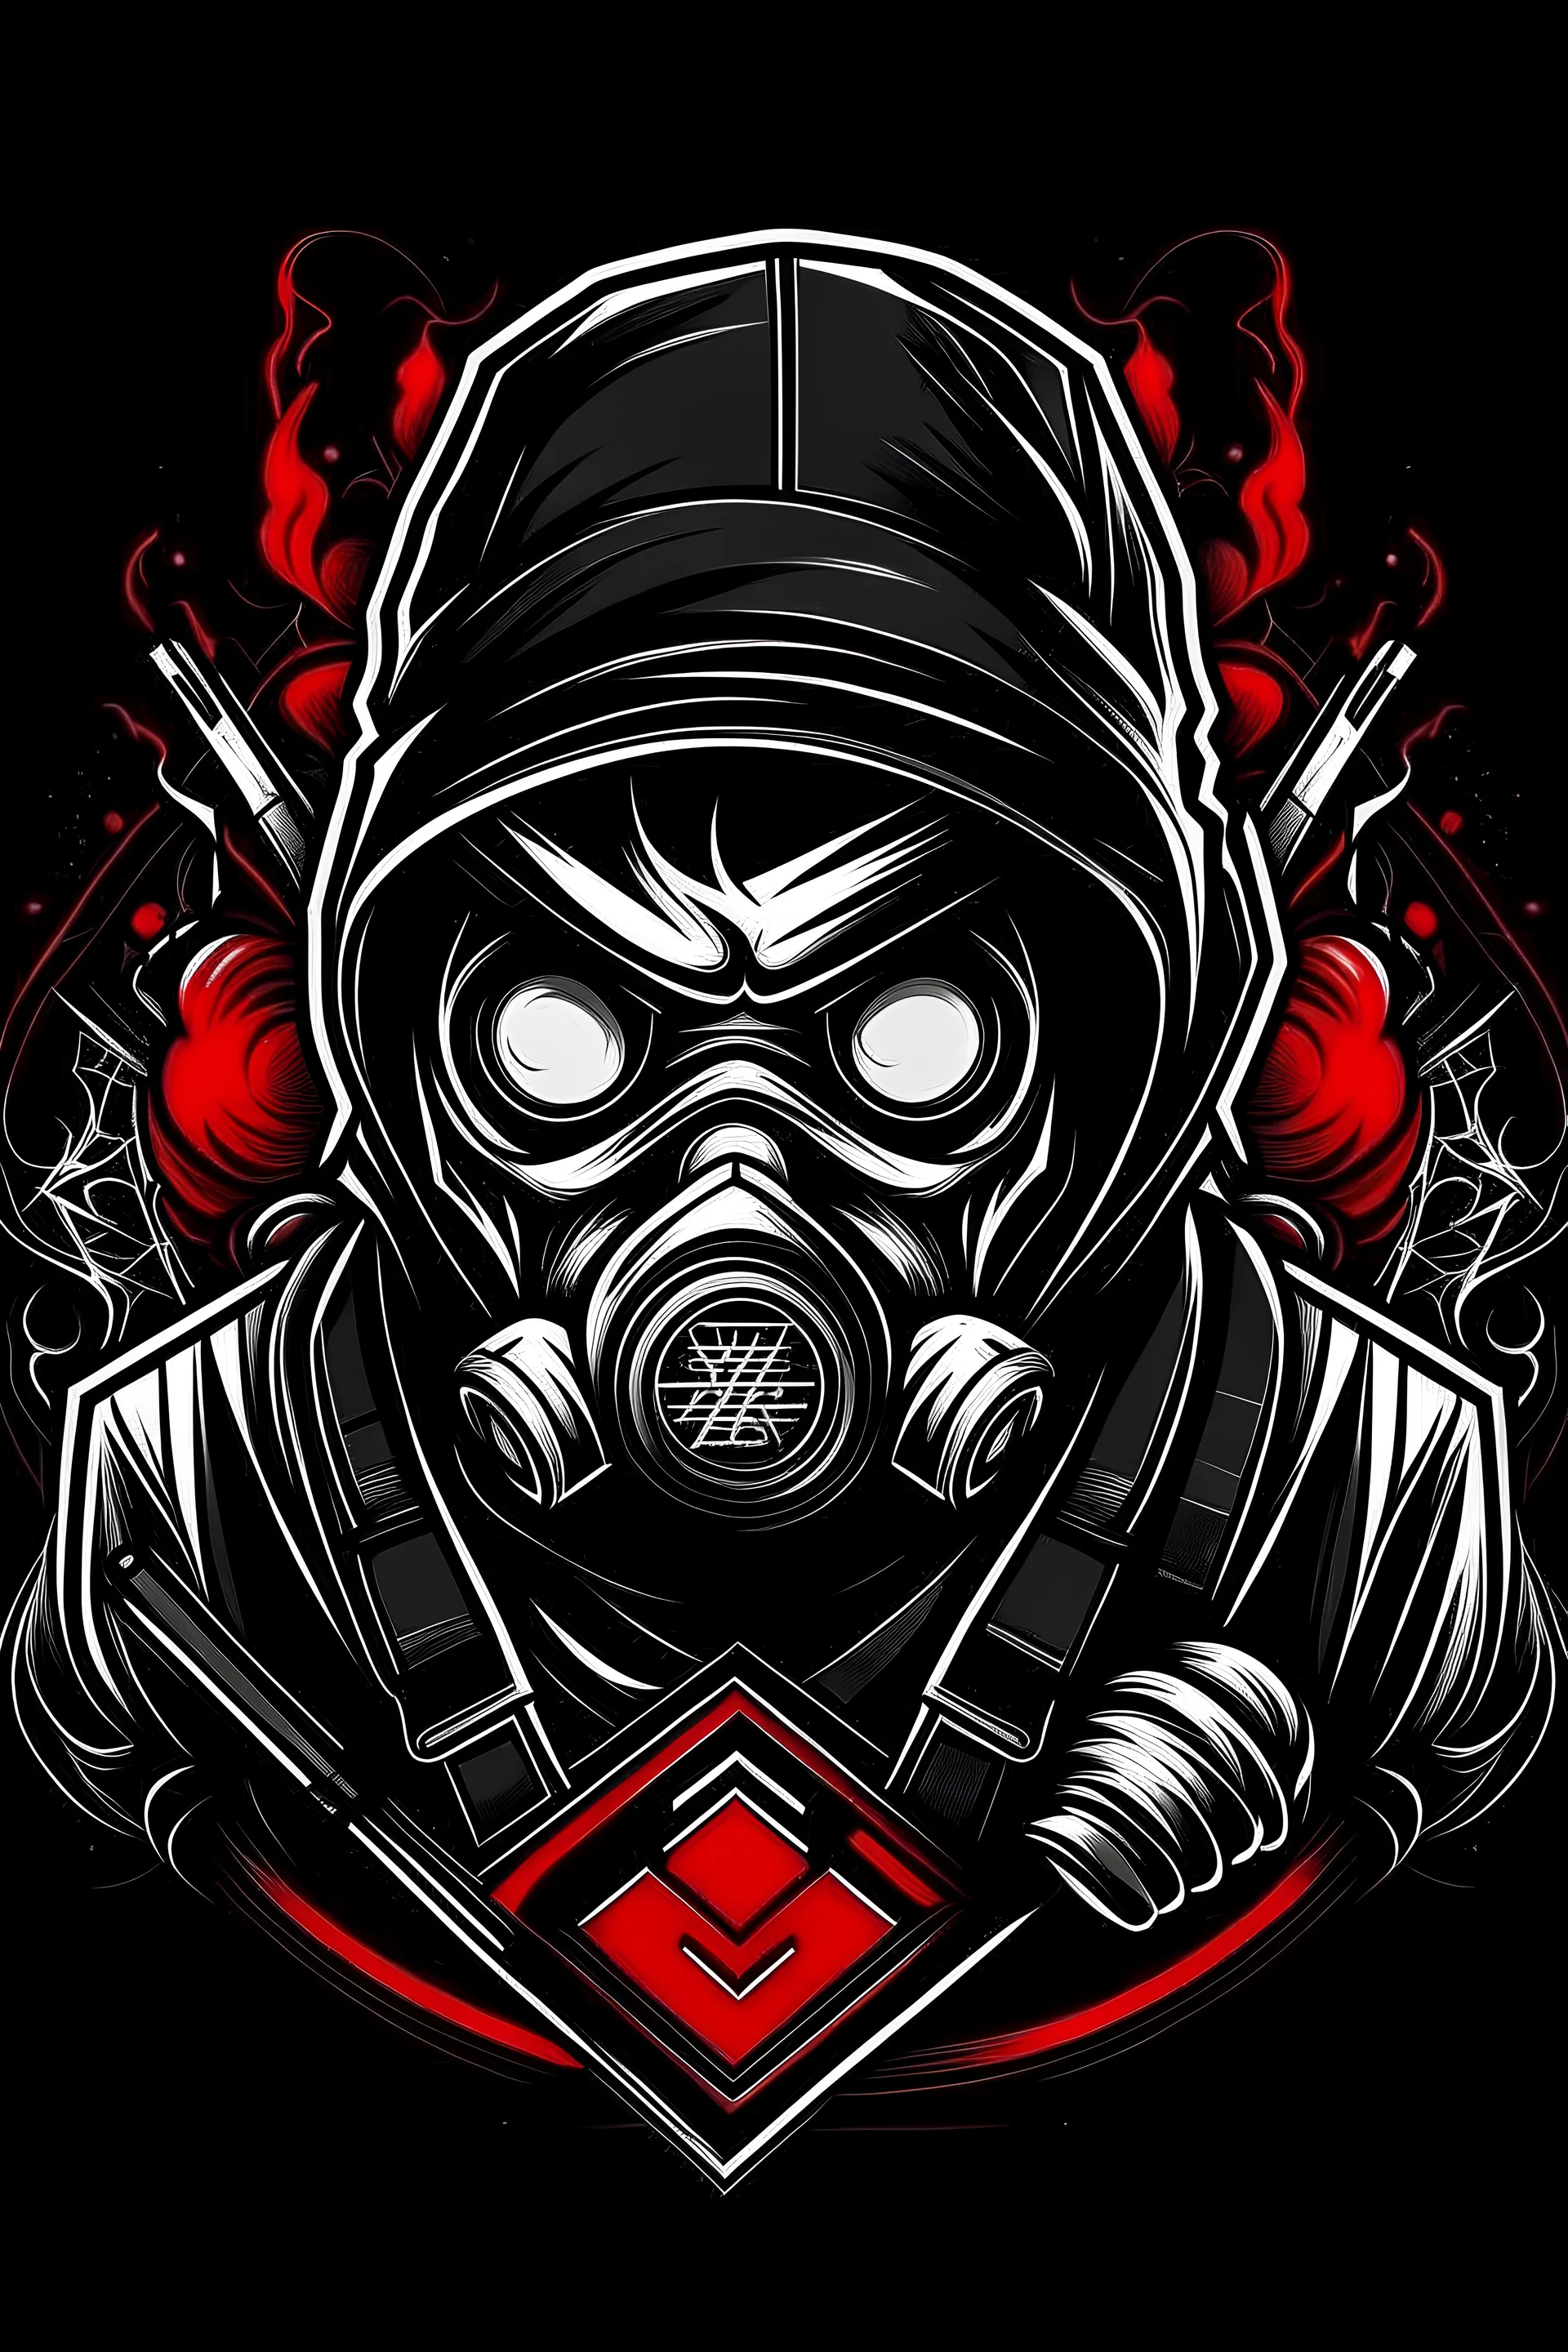 Create me an e sports style t-shirt design using the colors black, white and red that is linked to the criminal world with weapons and gas mask